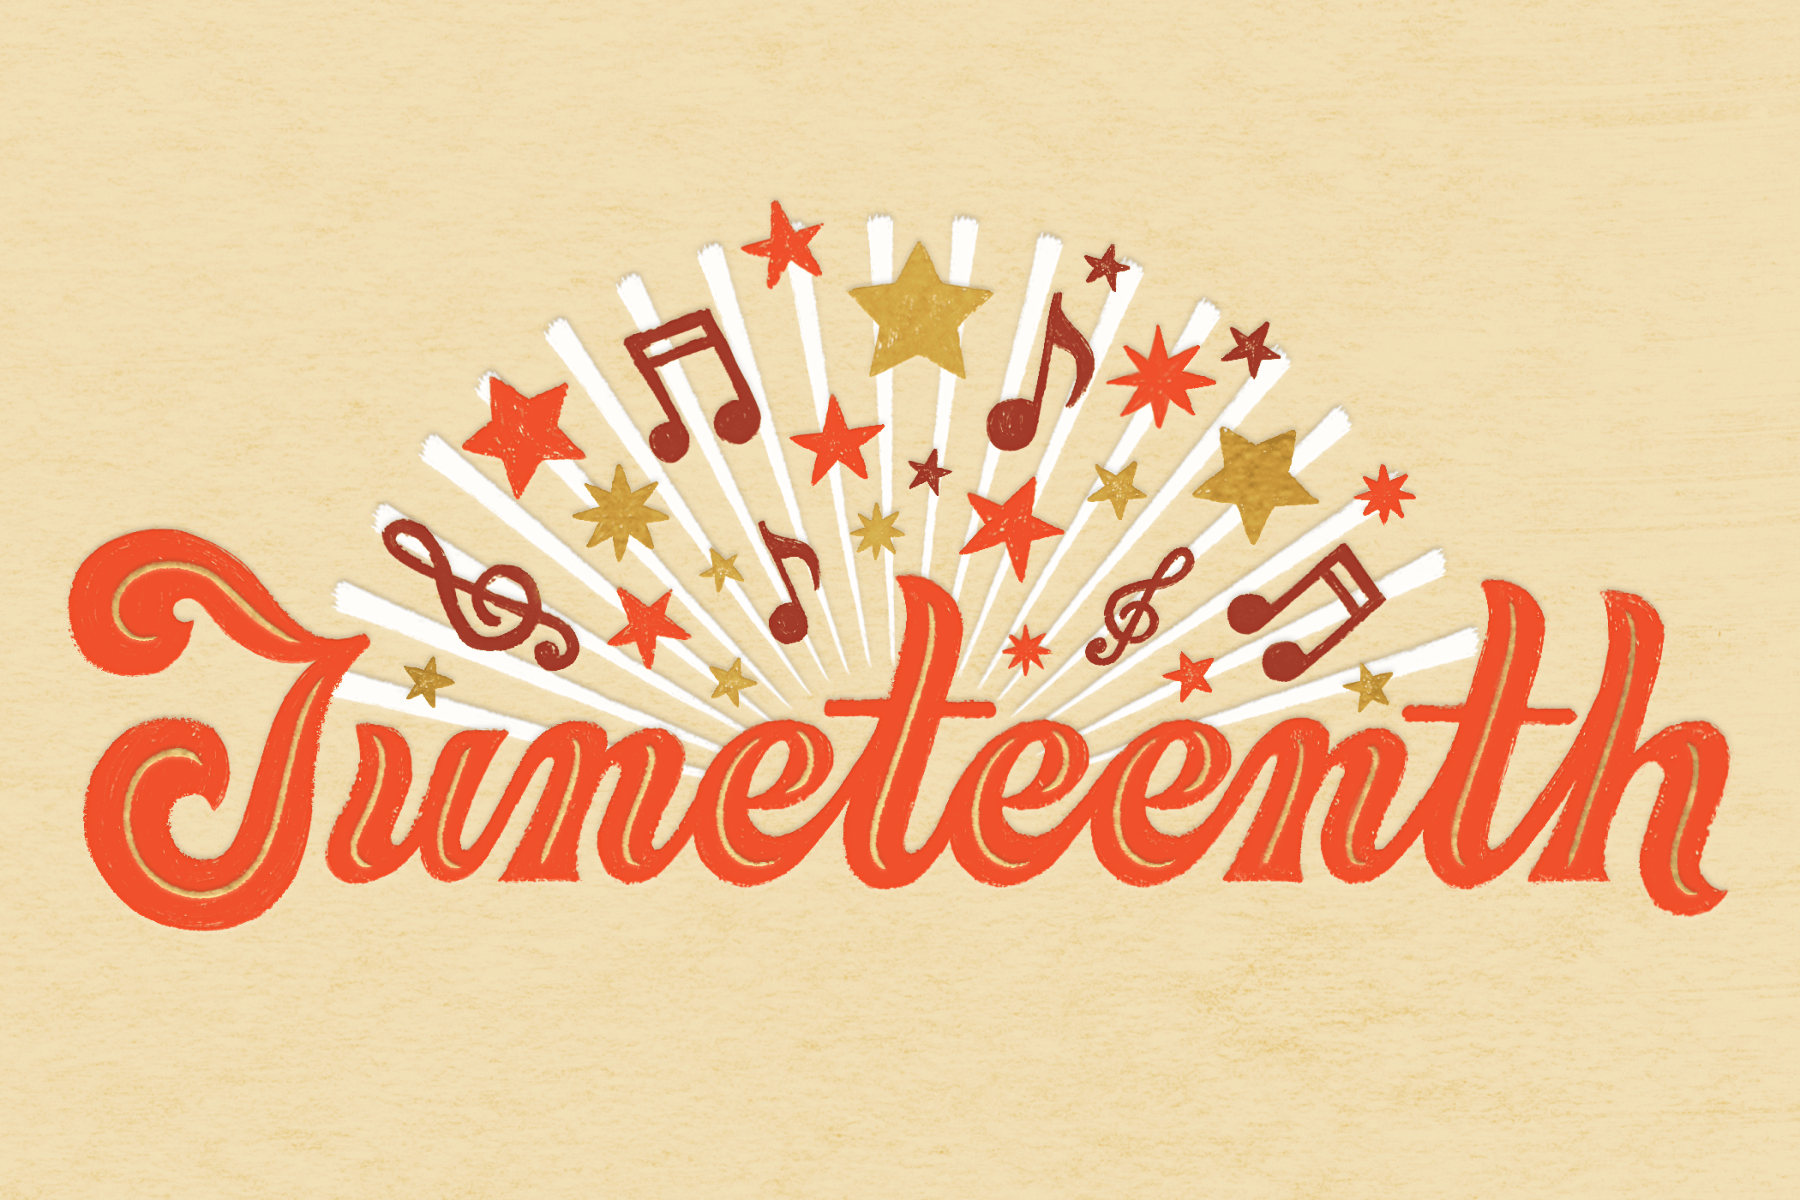 The word Juneteenth written in an Illustrative font with music notes and stars around it.